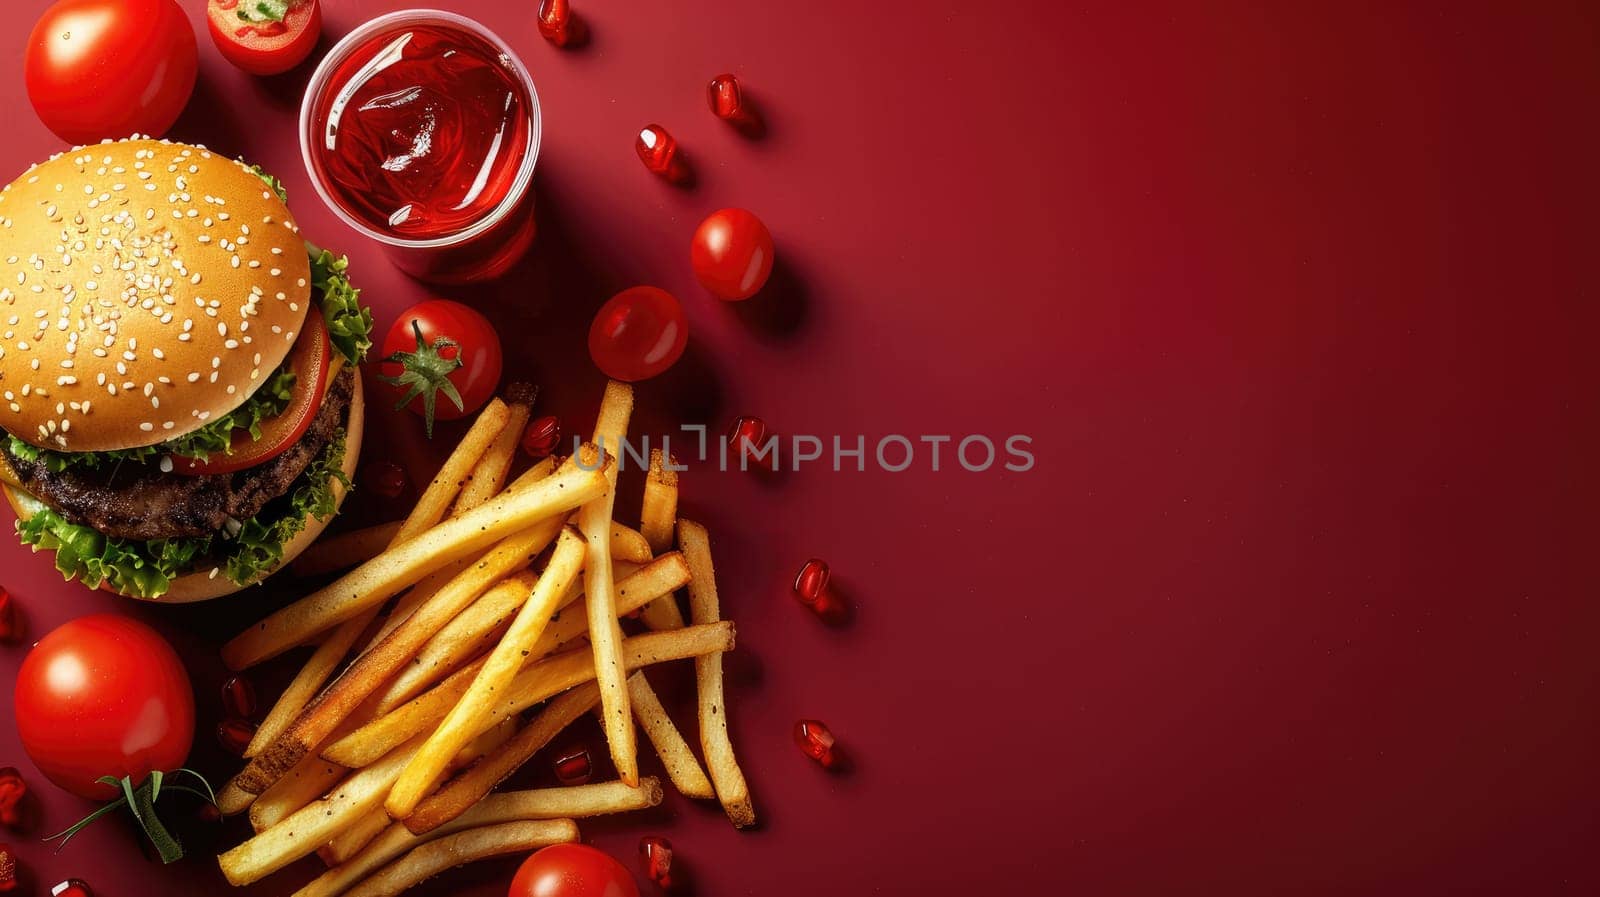 Hamburger, Fries, and Soda on Vibrant Background Banner, Minimalistic Fast Food Delights.